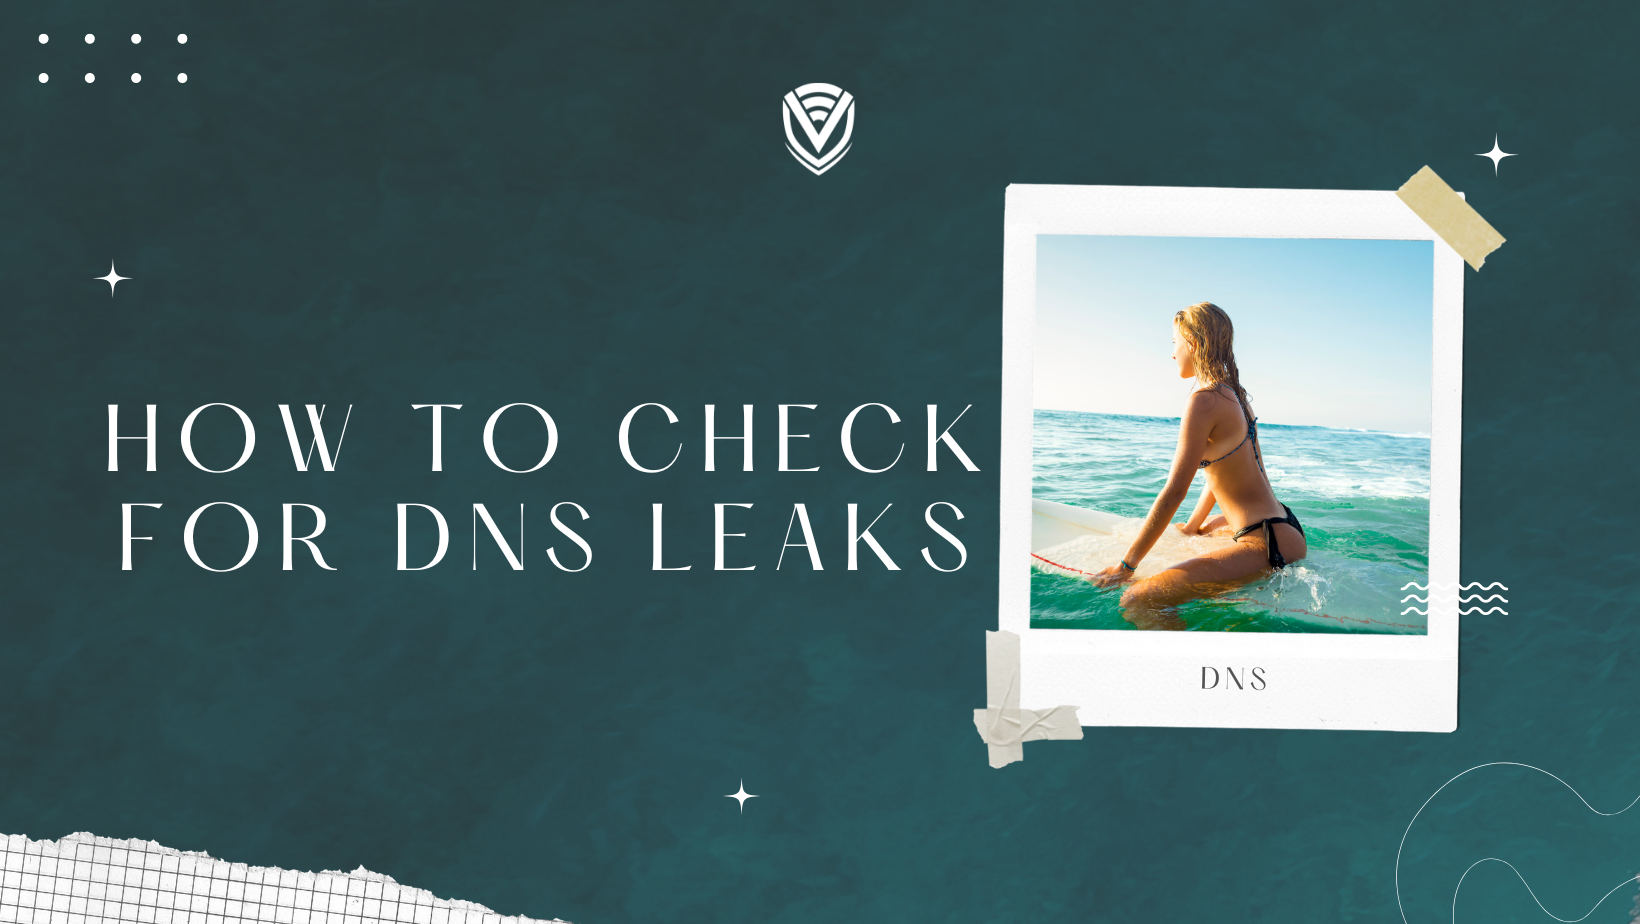 How to Check for DNS Leaks